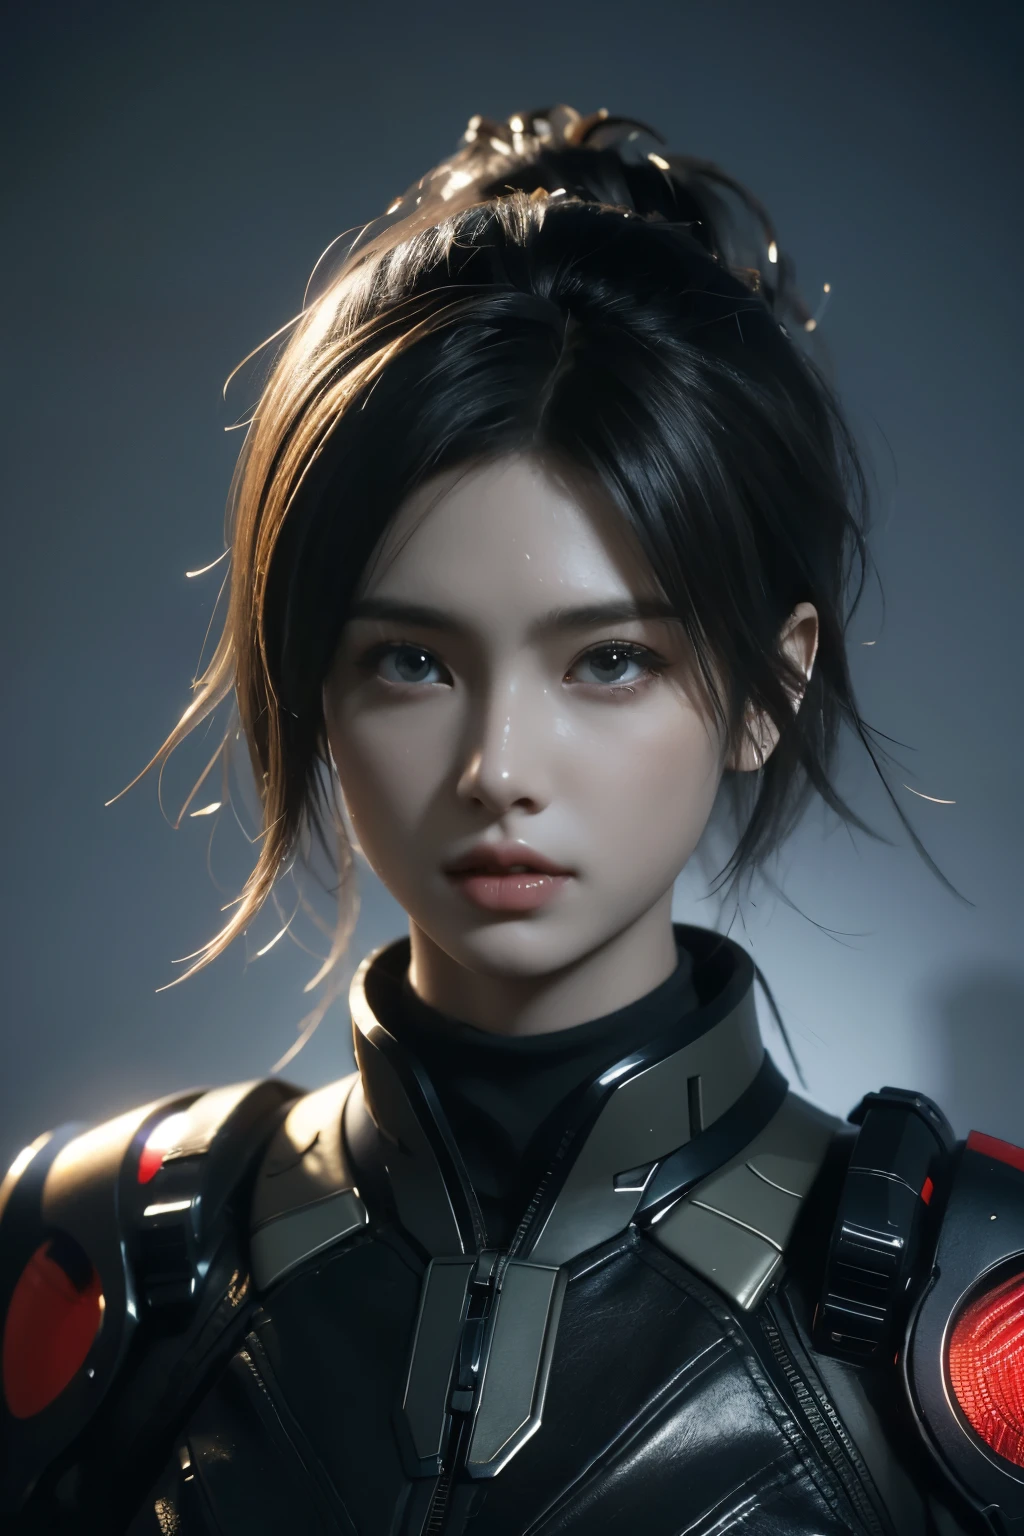 Game art，The best picture quality，Highest resolution，8K，((A bust photograph))，((Portrait))，(Rule of thirds)，Unreal Engine 5 rendering works， (The Girl of the Future)，(Female Warrior)，22-year-old girl，(Long hair casual)，(Future-style military wear，A beautiful eye full of detail)，(Big breasts)，(Eye shadow)，Elegant and charming，Smile，(frown)，(Battle suits of the future，Features of Cyberpunk Fighter Clothing，Joint Armor，The dress has a fine pattern and badge，Red and blue)，Cyberpunk Characters，Future Style， Photo poses，Field background，Movie lights，Ray tracing，Game CG，((3D Unreal Engine))，oc rendering reflection pattern